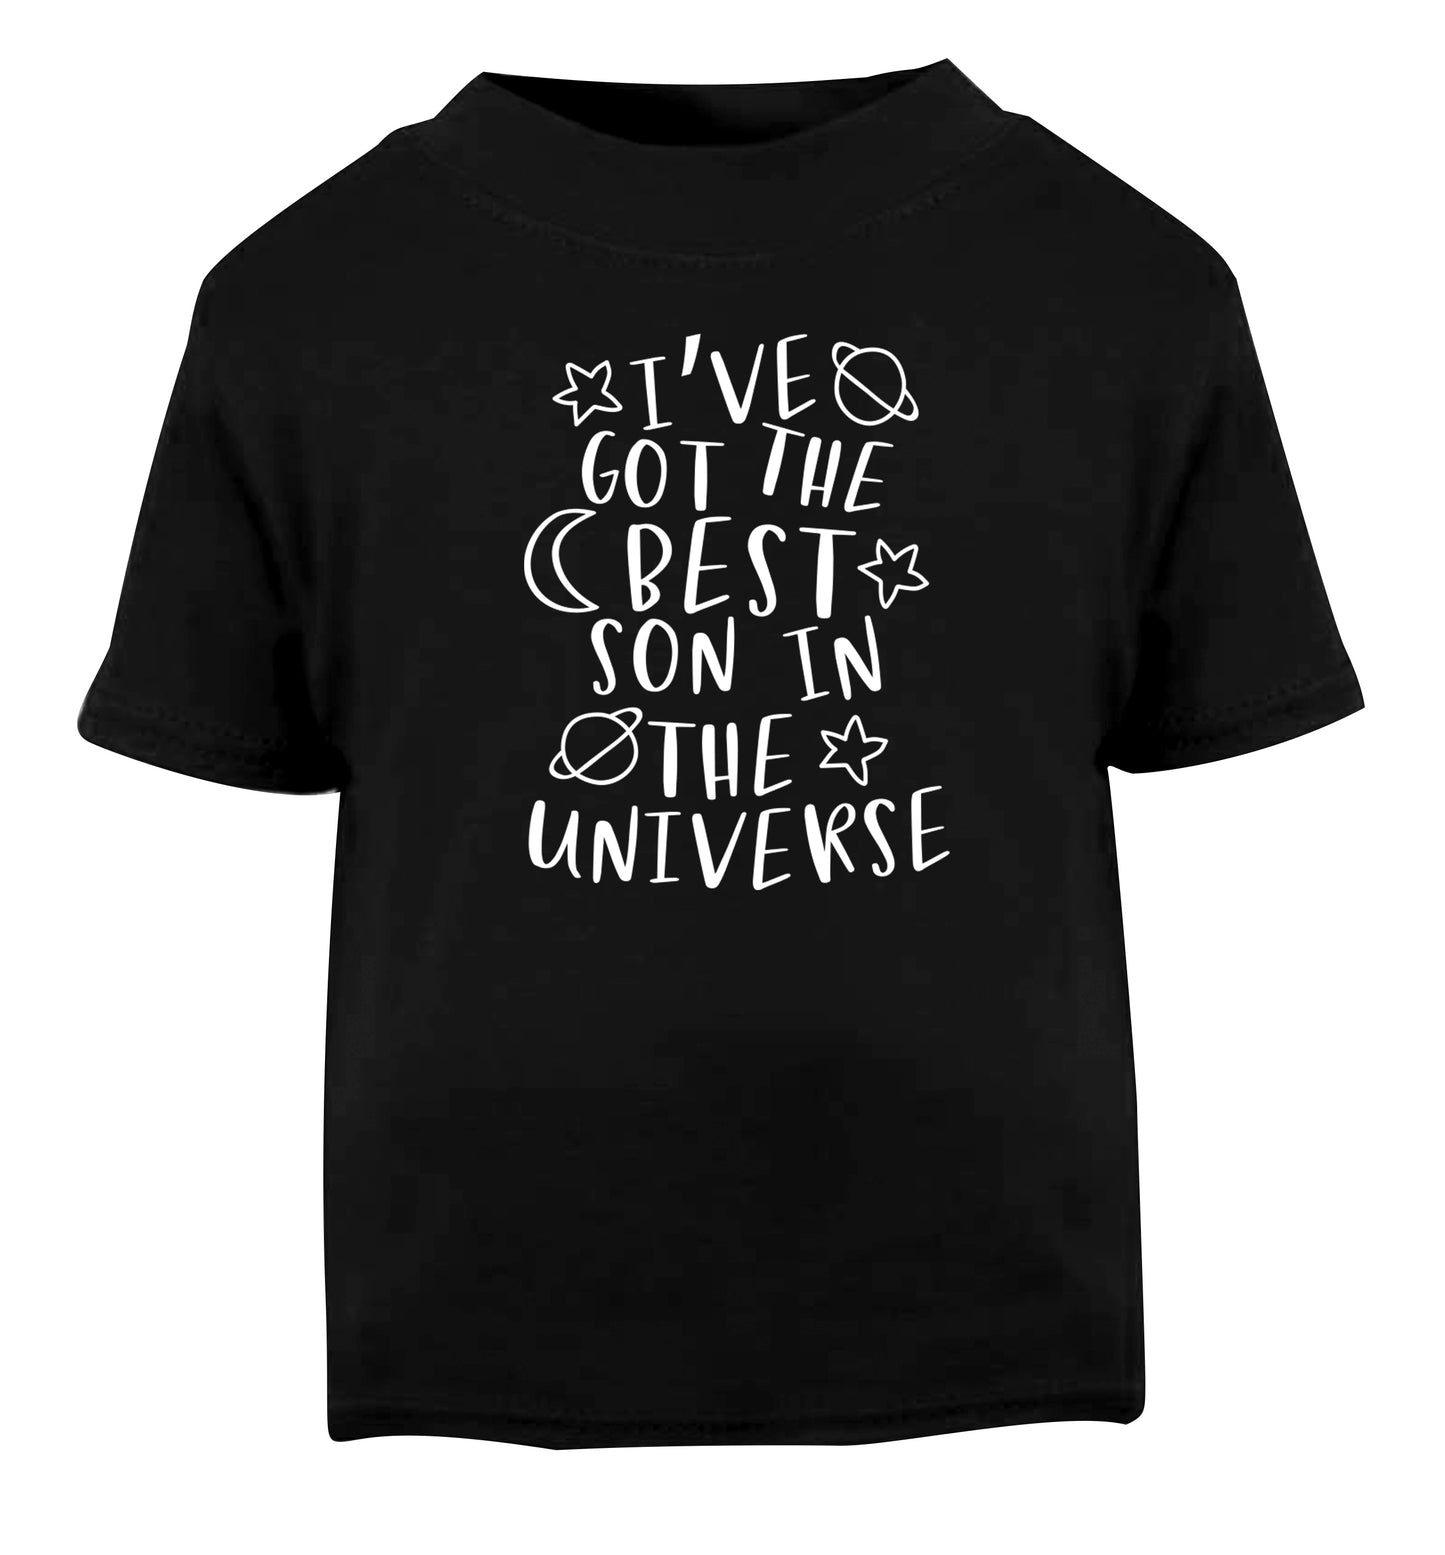 I've got the best son in the universe Black Baby Toddler Tshirt 2 years